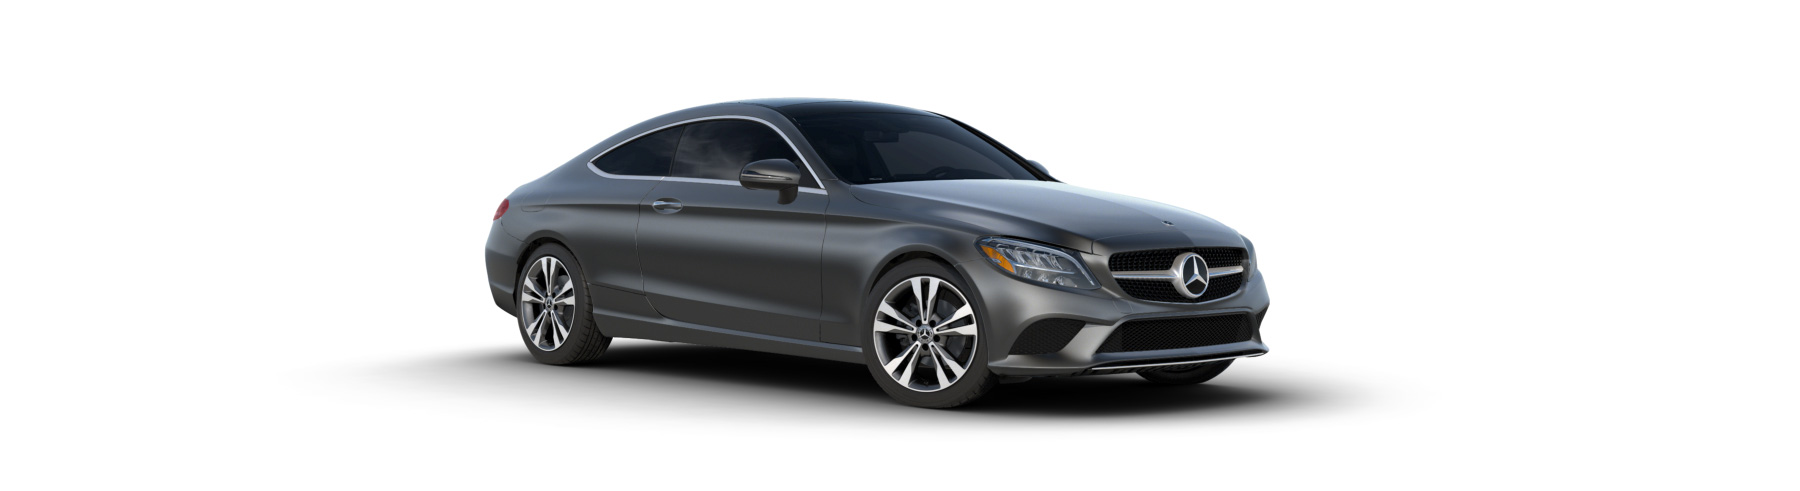 2020 Mercedes-Benz C-Class Coupe Main Img